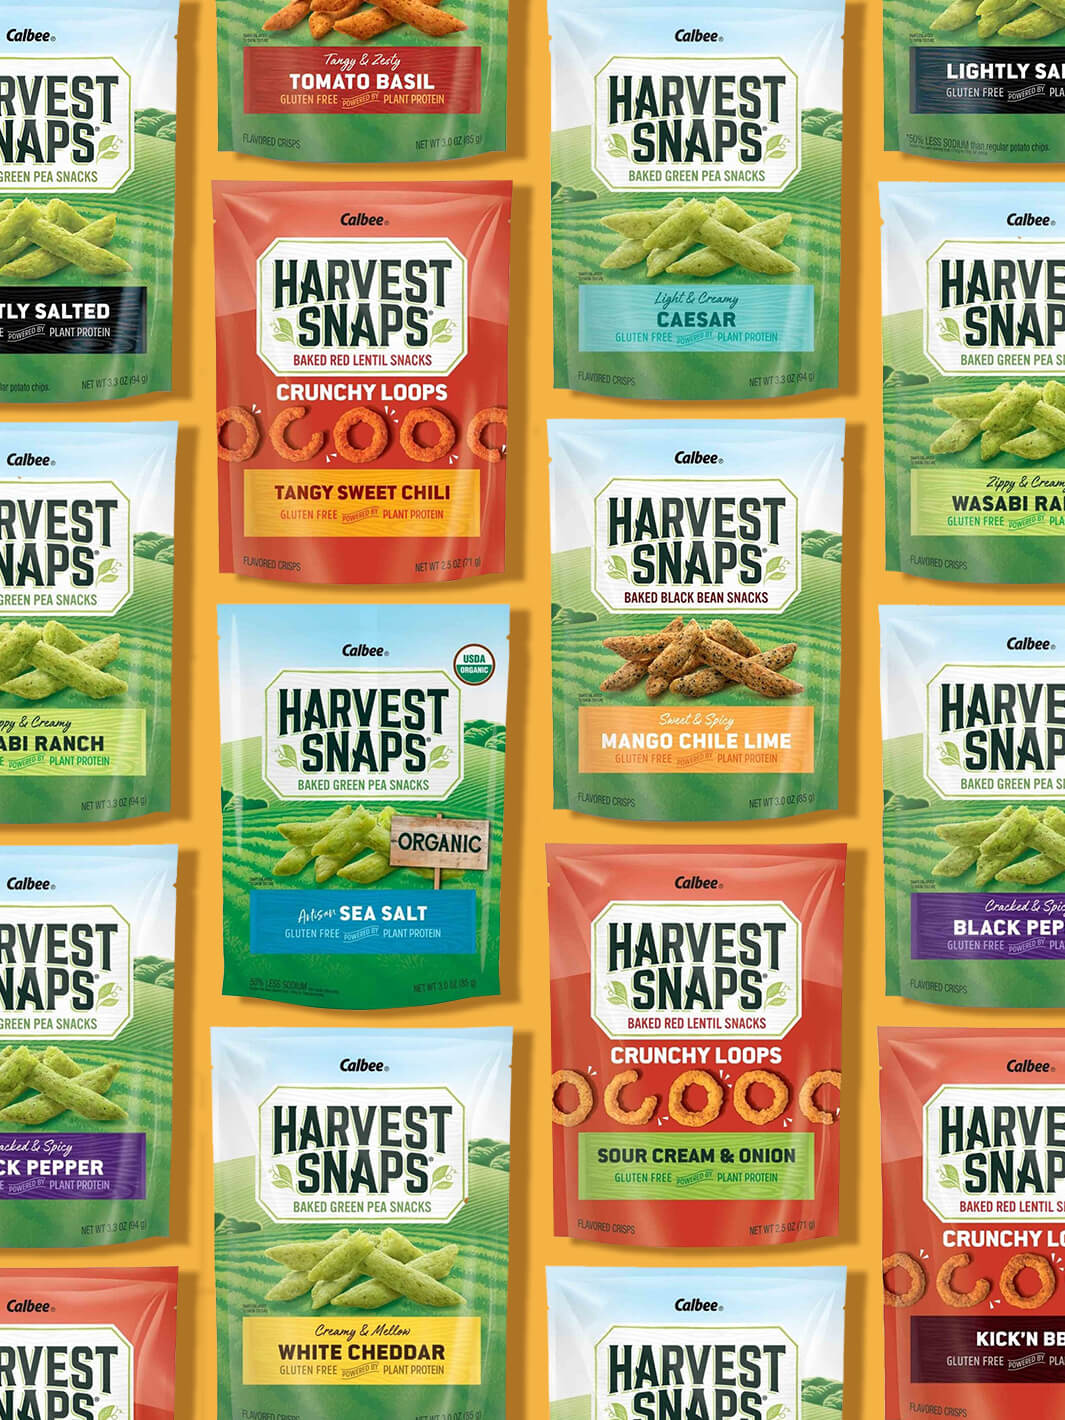 various Harvest snaps products